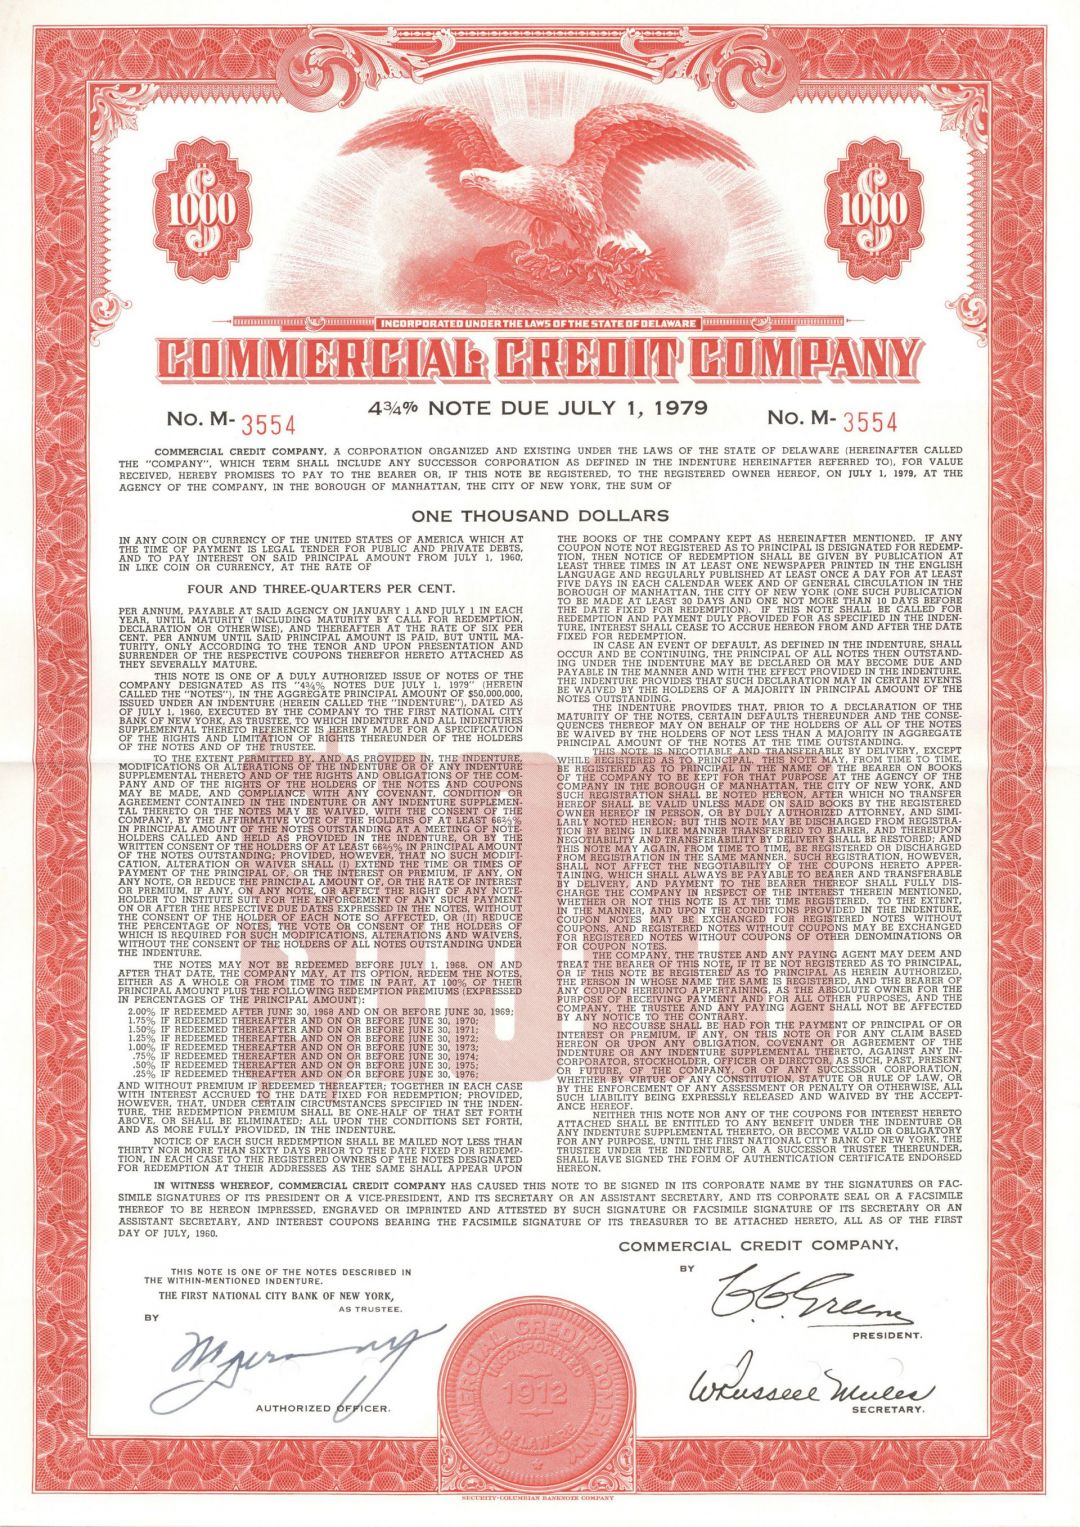 Commercial Credit Co. - 1960 dated $1,000 Bond - Alexander Edward Duncan was the Founder